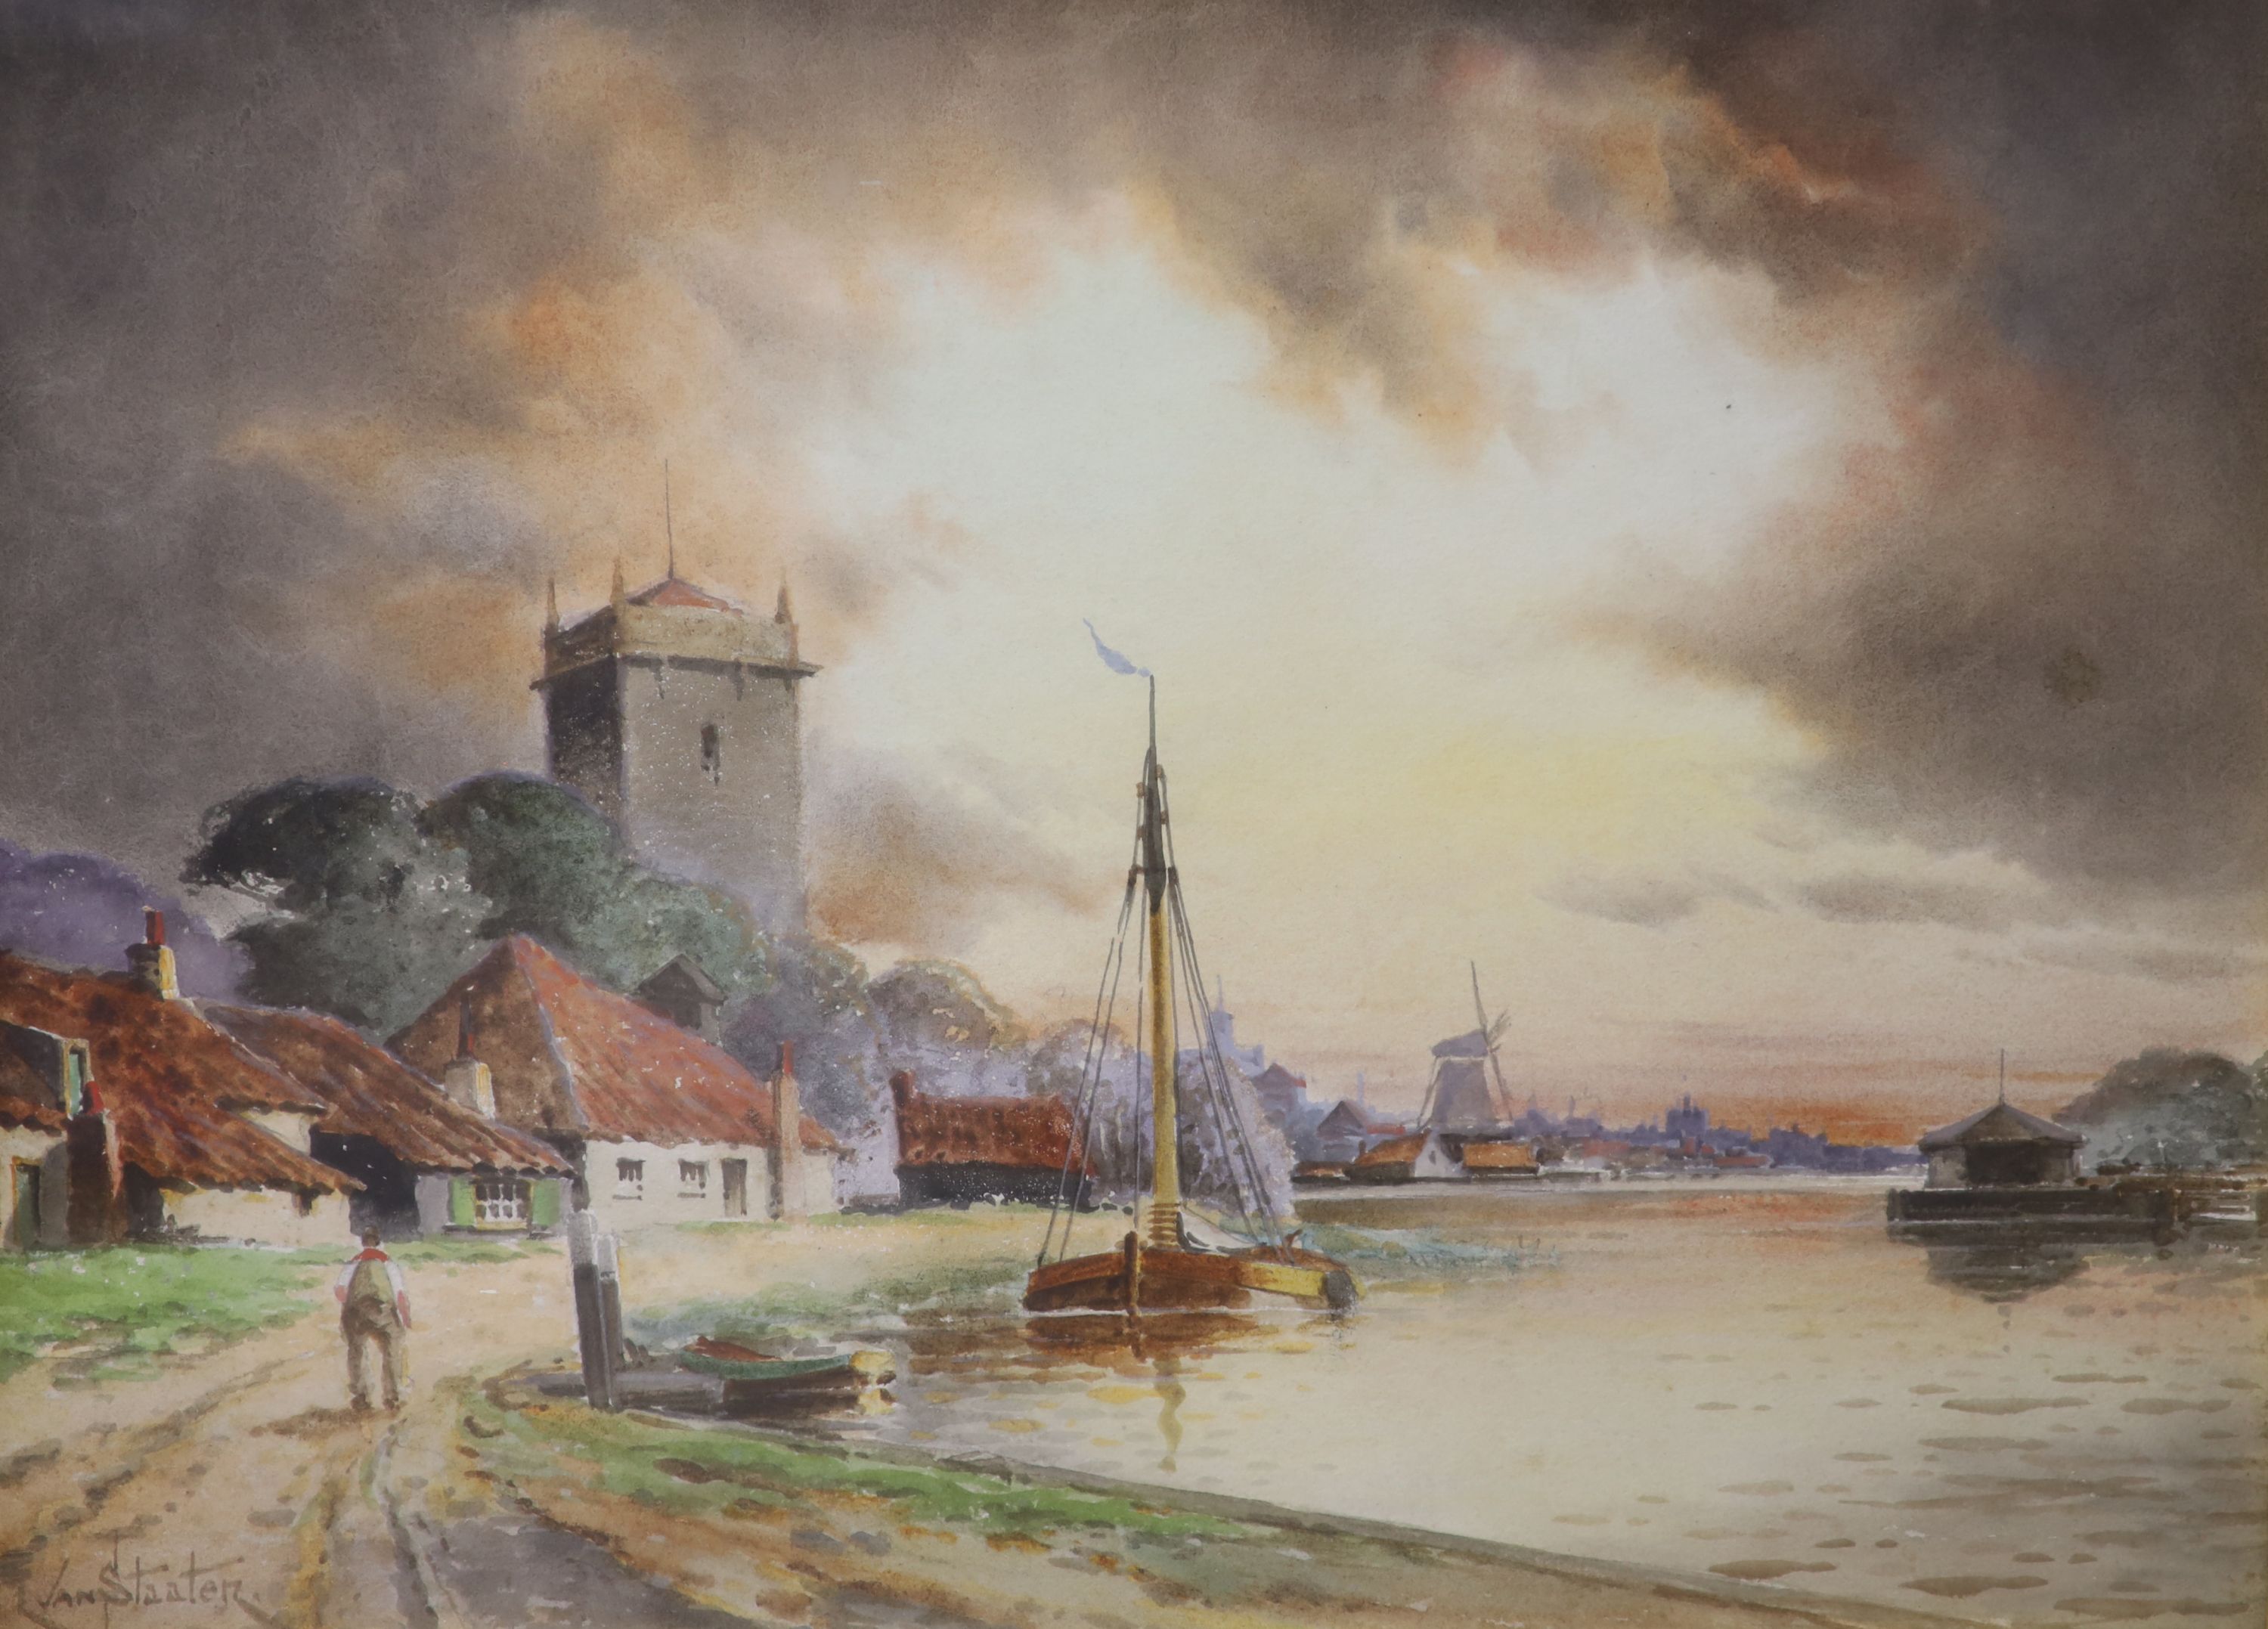 Louise Van Staten, watercolour, Estuary scene with church and windmills, signed, 29 x 39cm